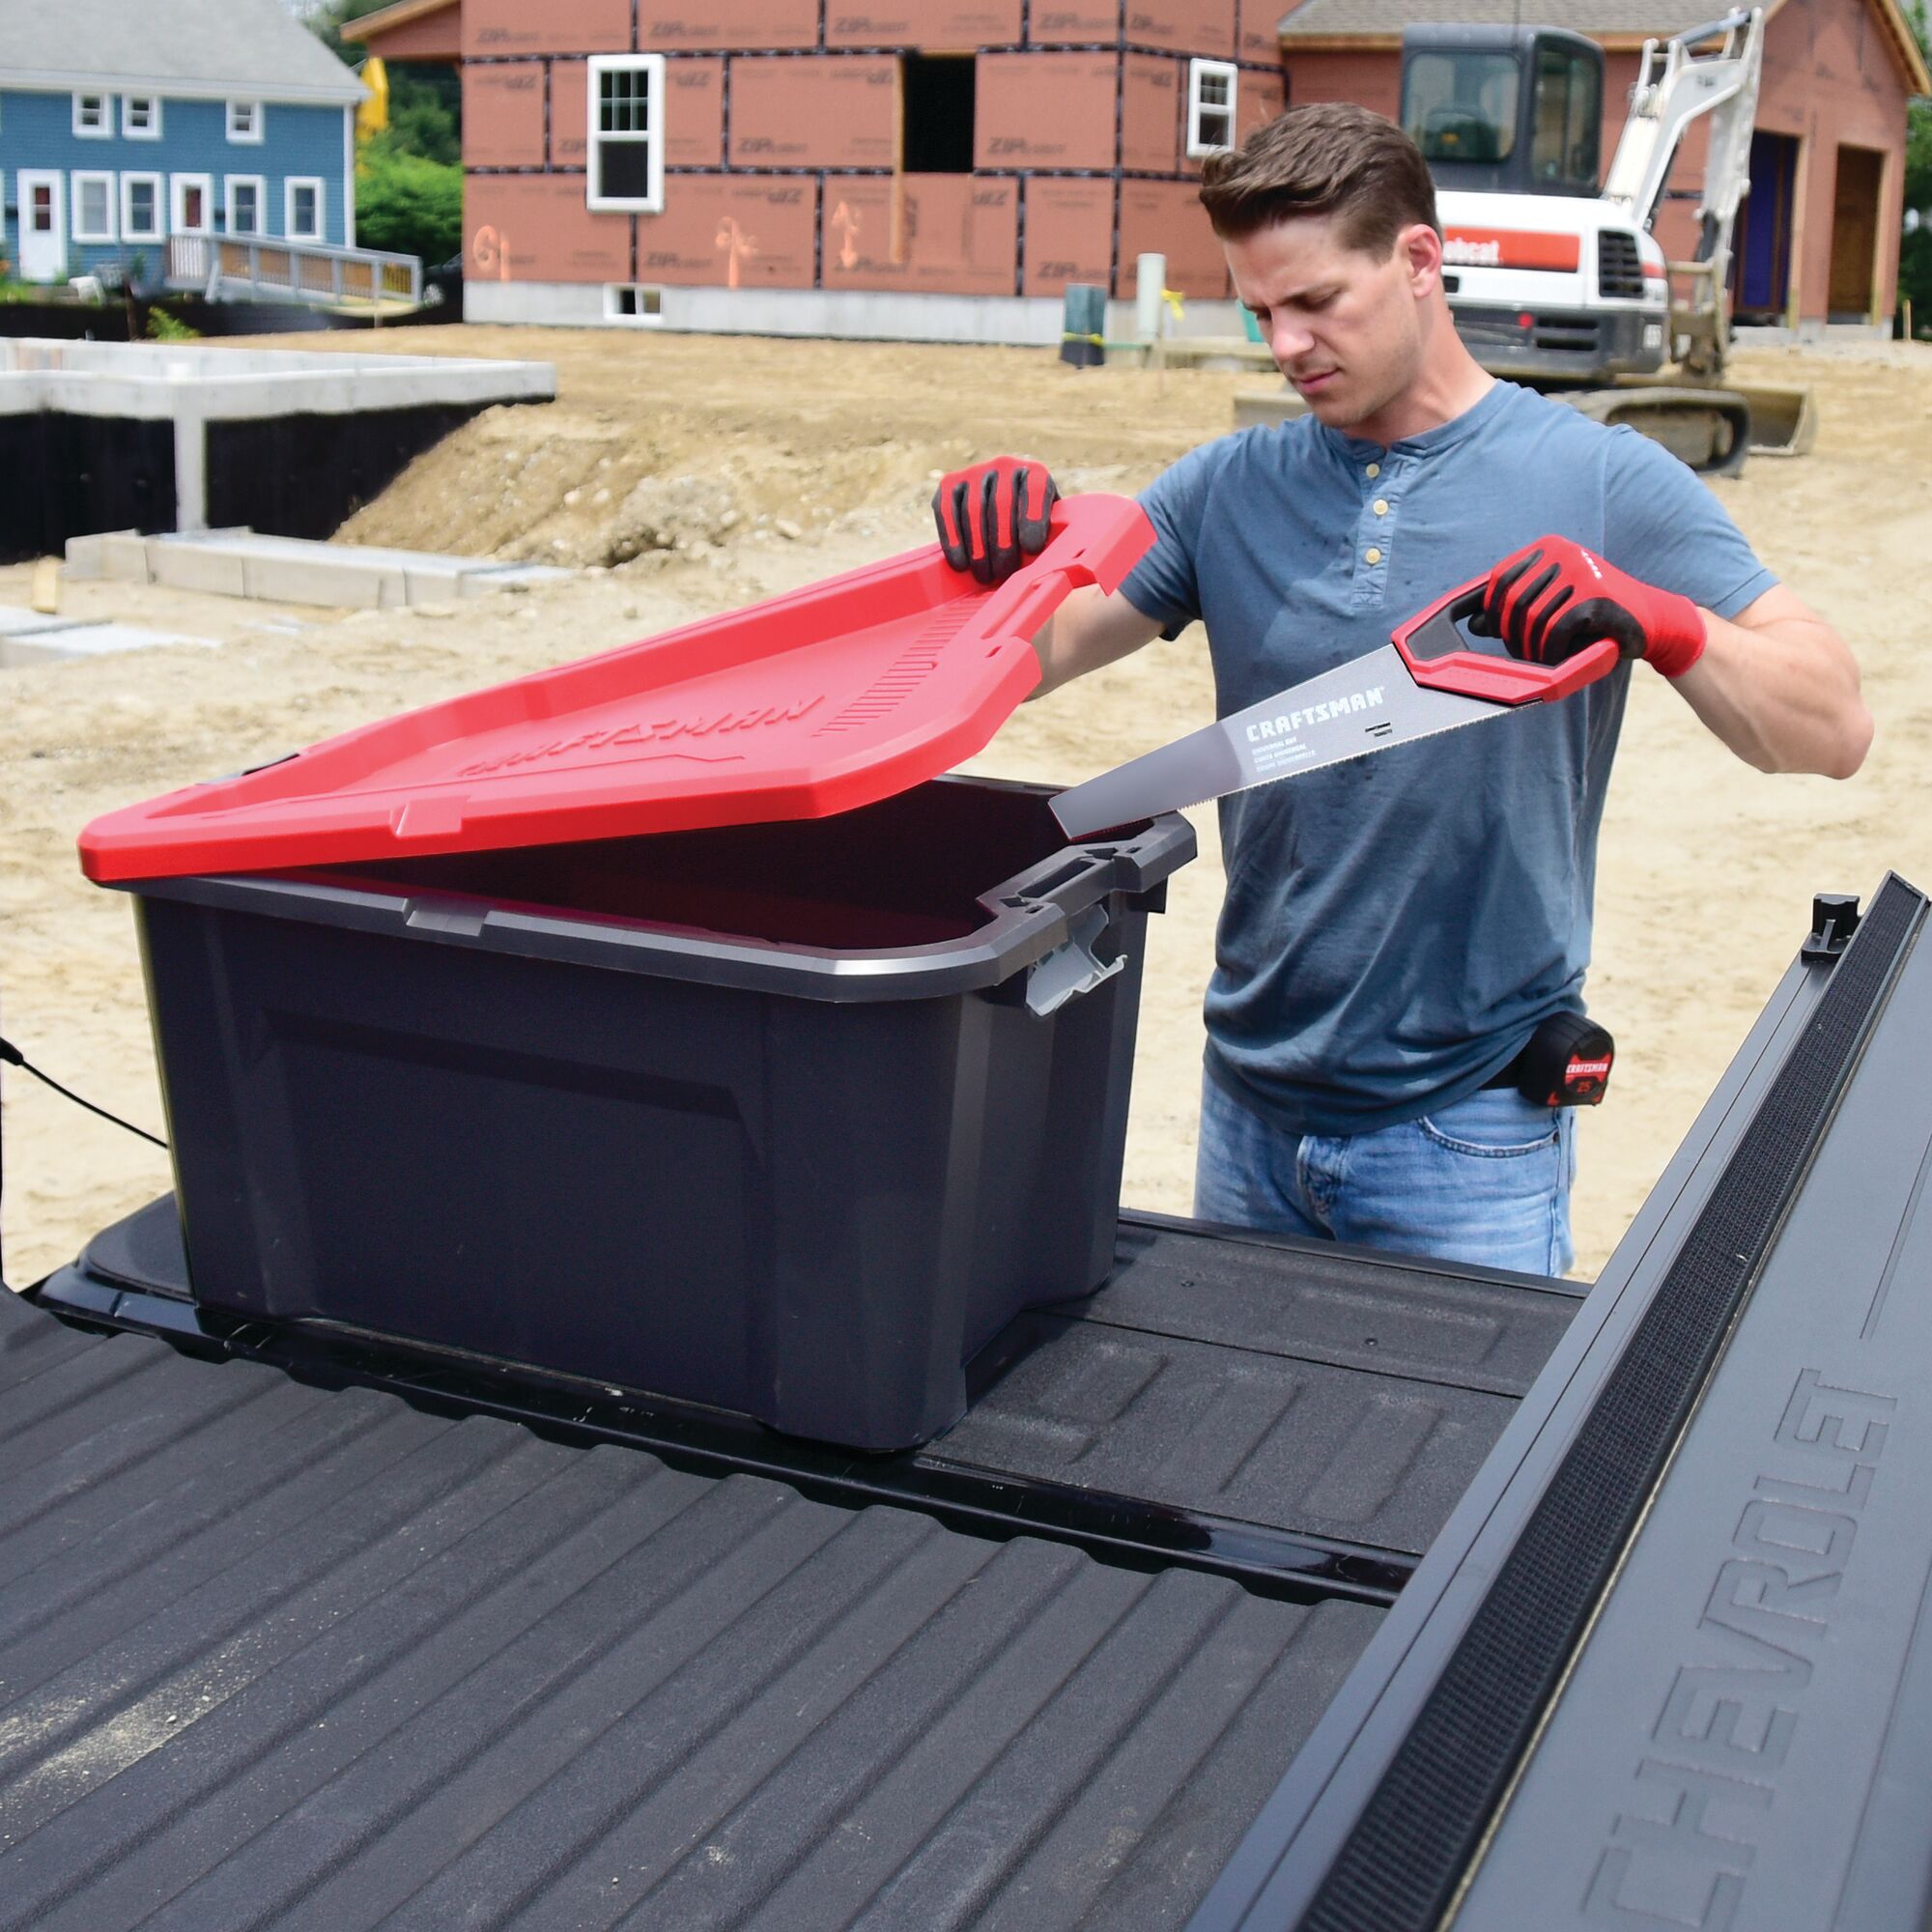 30 Gallon latching tote being used by a person to store tools.